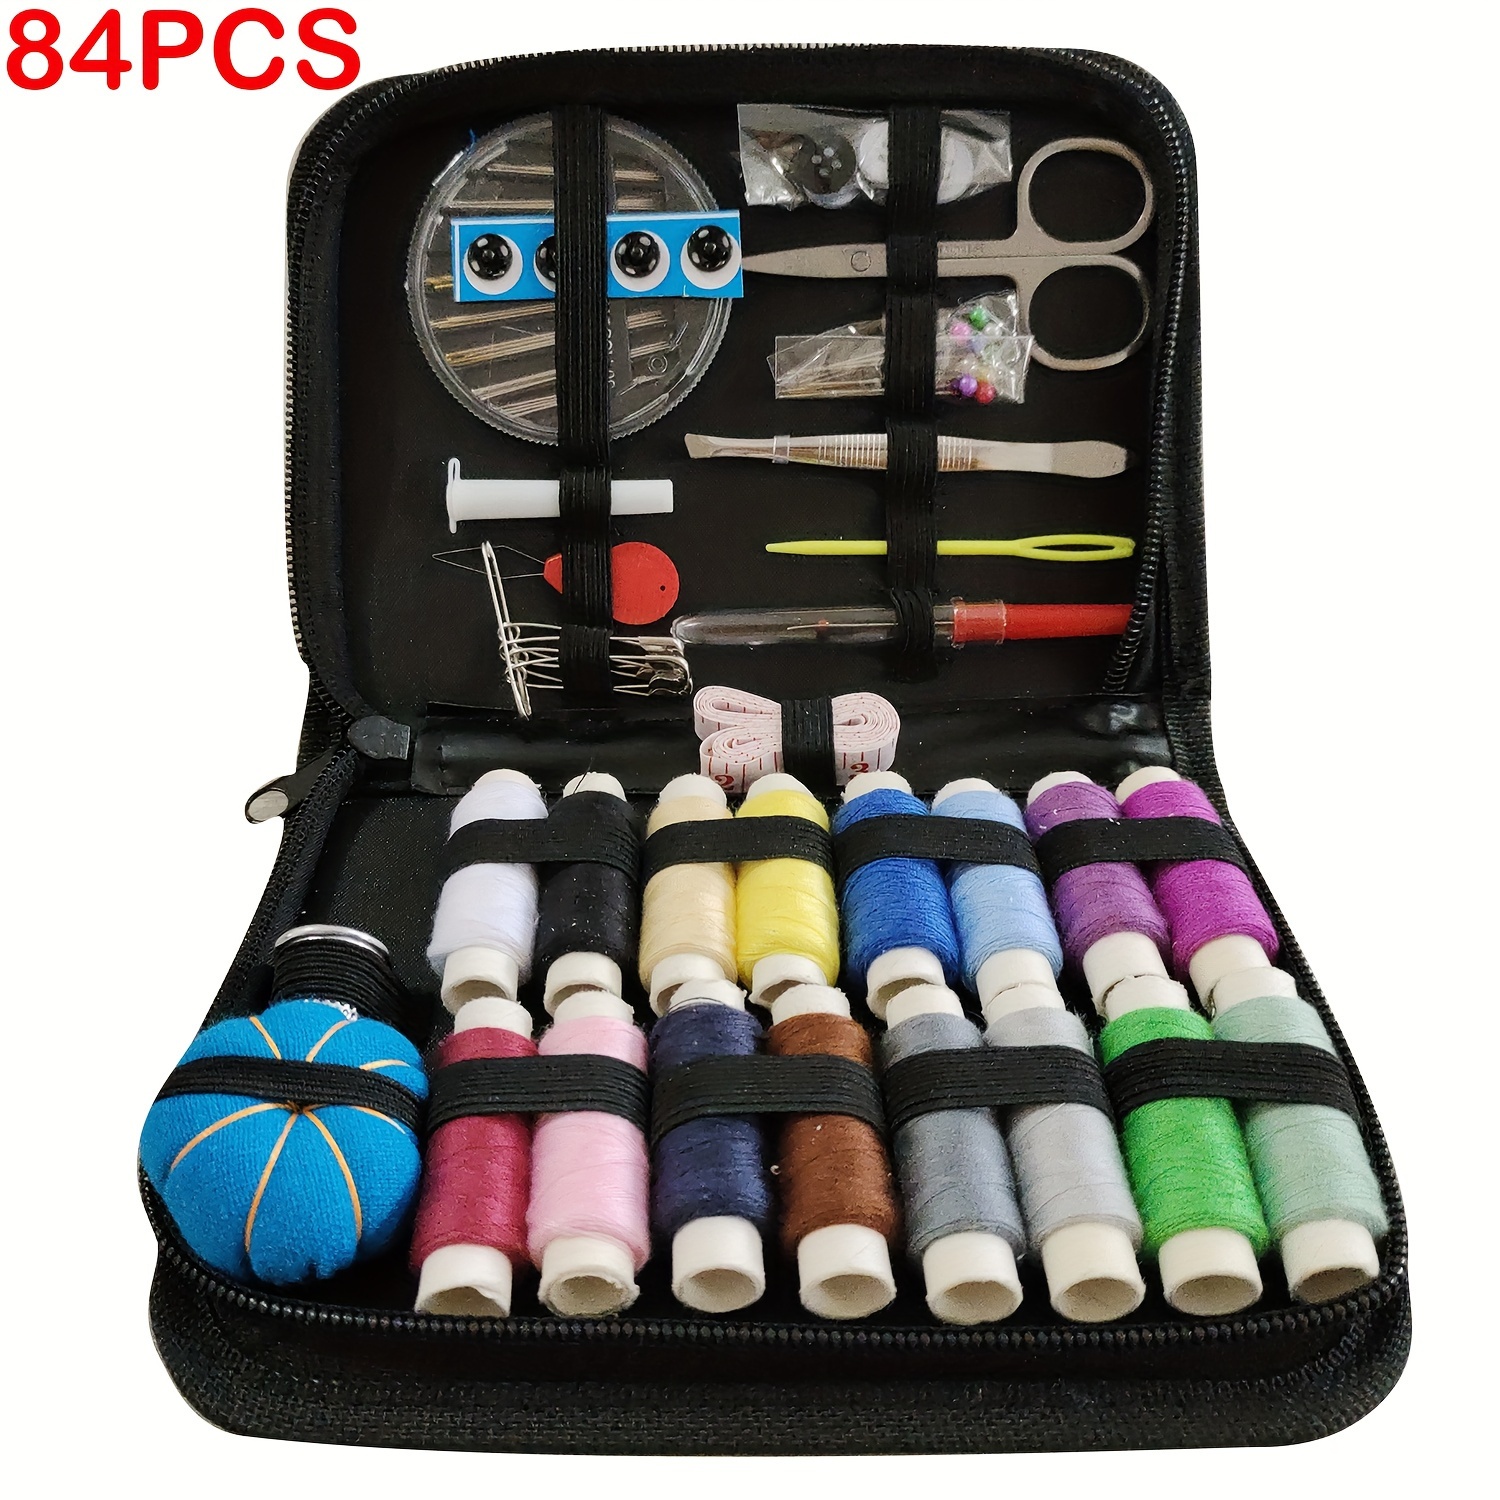 

98/84pcs Sewing Kit With Sewing Supplies And Accessories - 40-color Threads, Needle And Thread Kit Products For Small Fixes, Basic Mini Travel Sewing Kit For Emergency Repairs